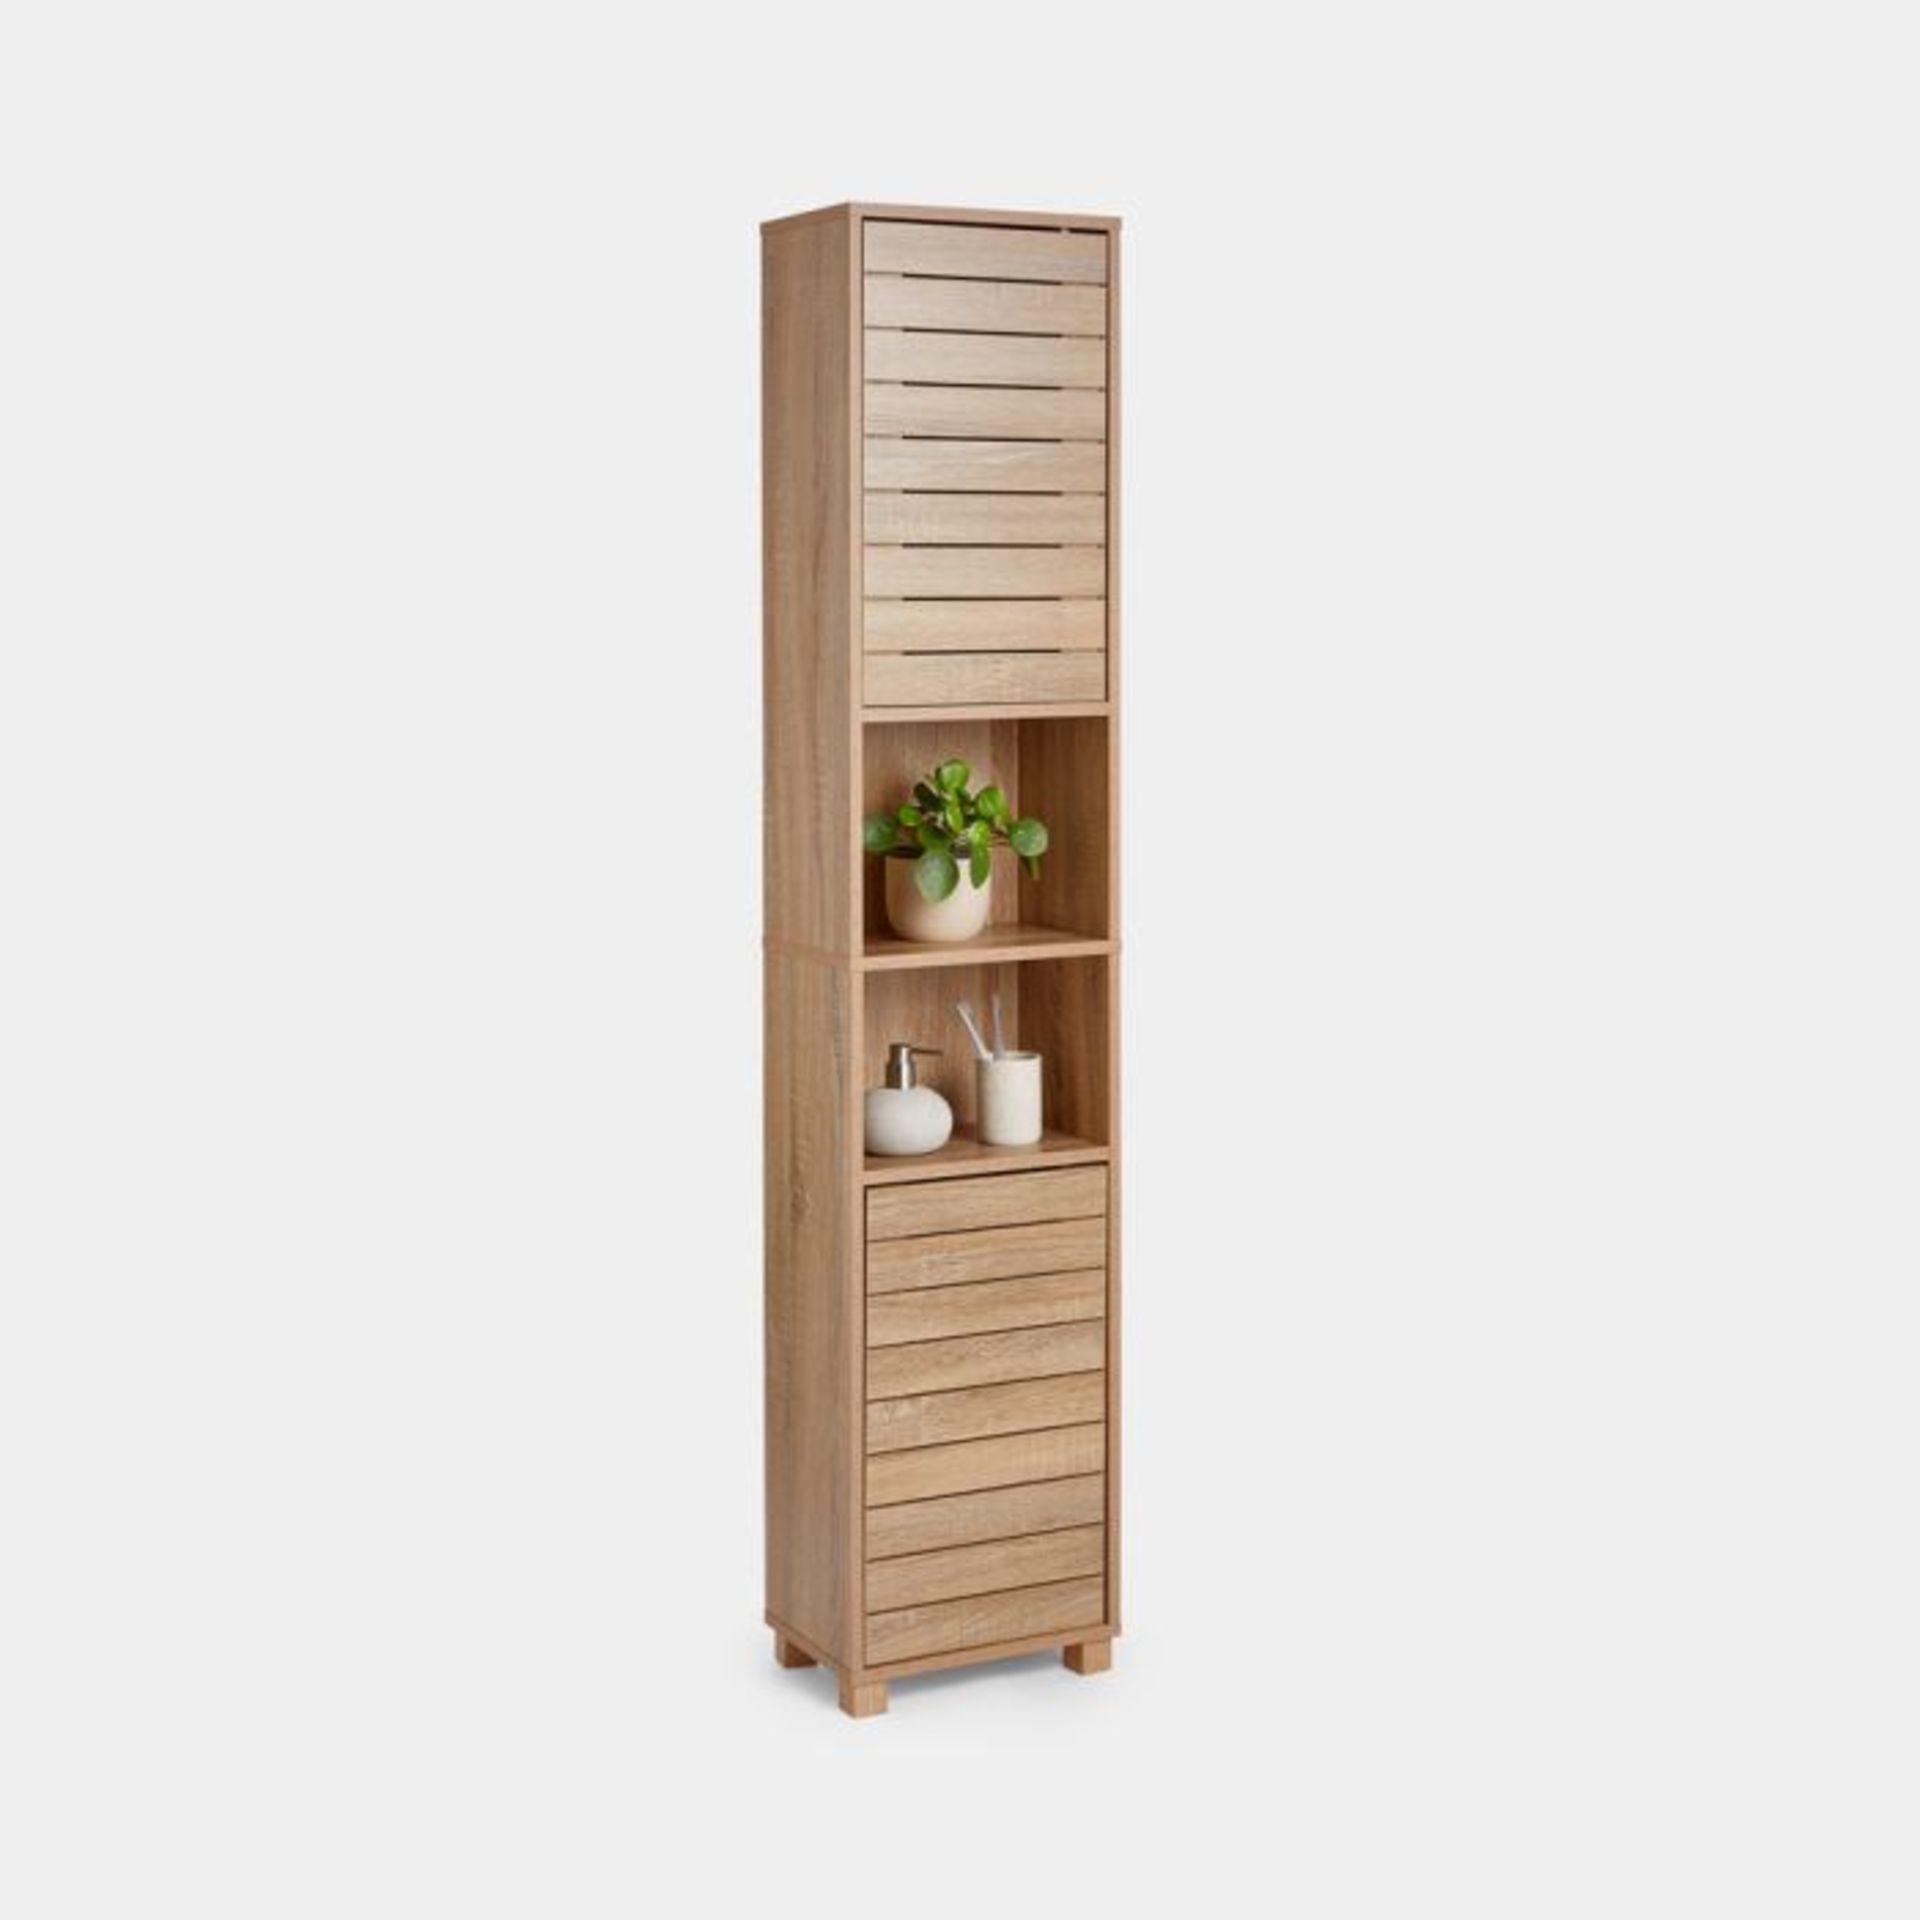 Chester Tallboy Bathroom Cabinet. - ER38. We all love to be house proud when it comes to our